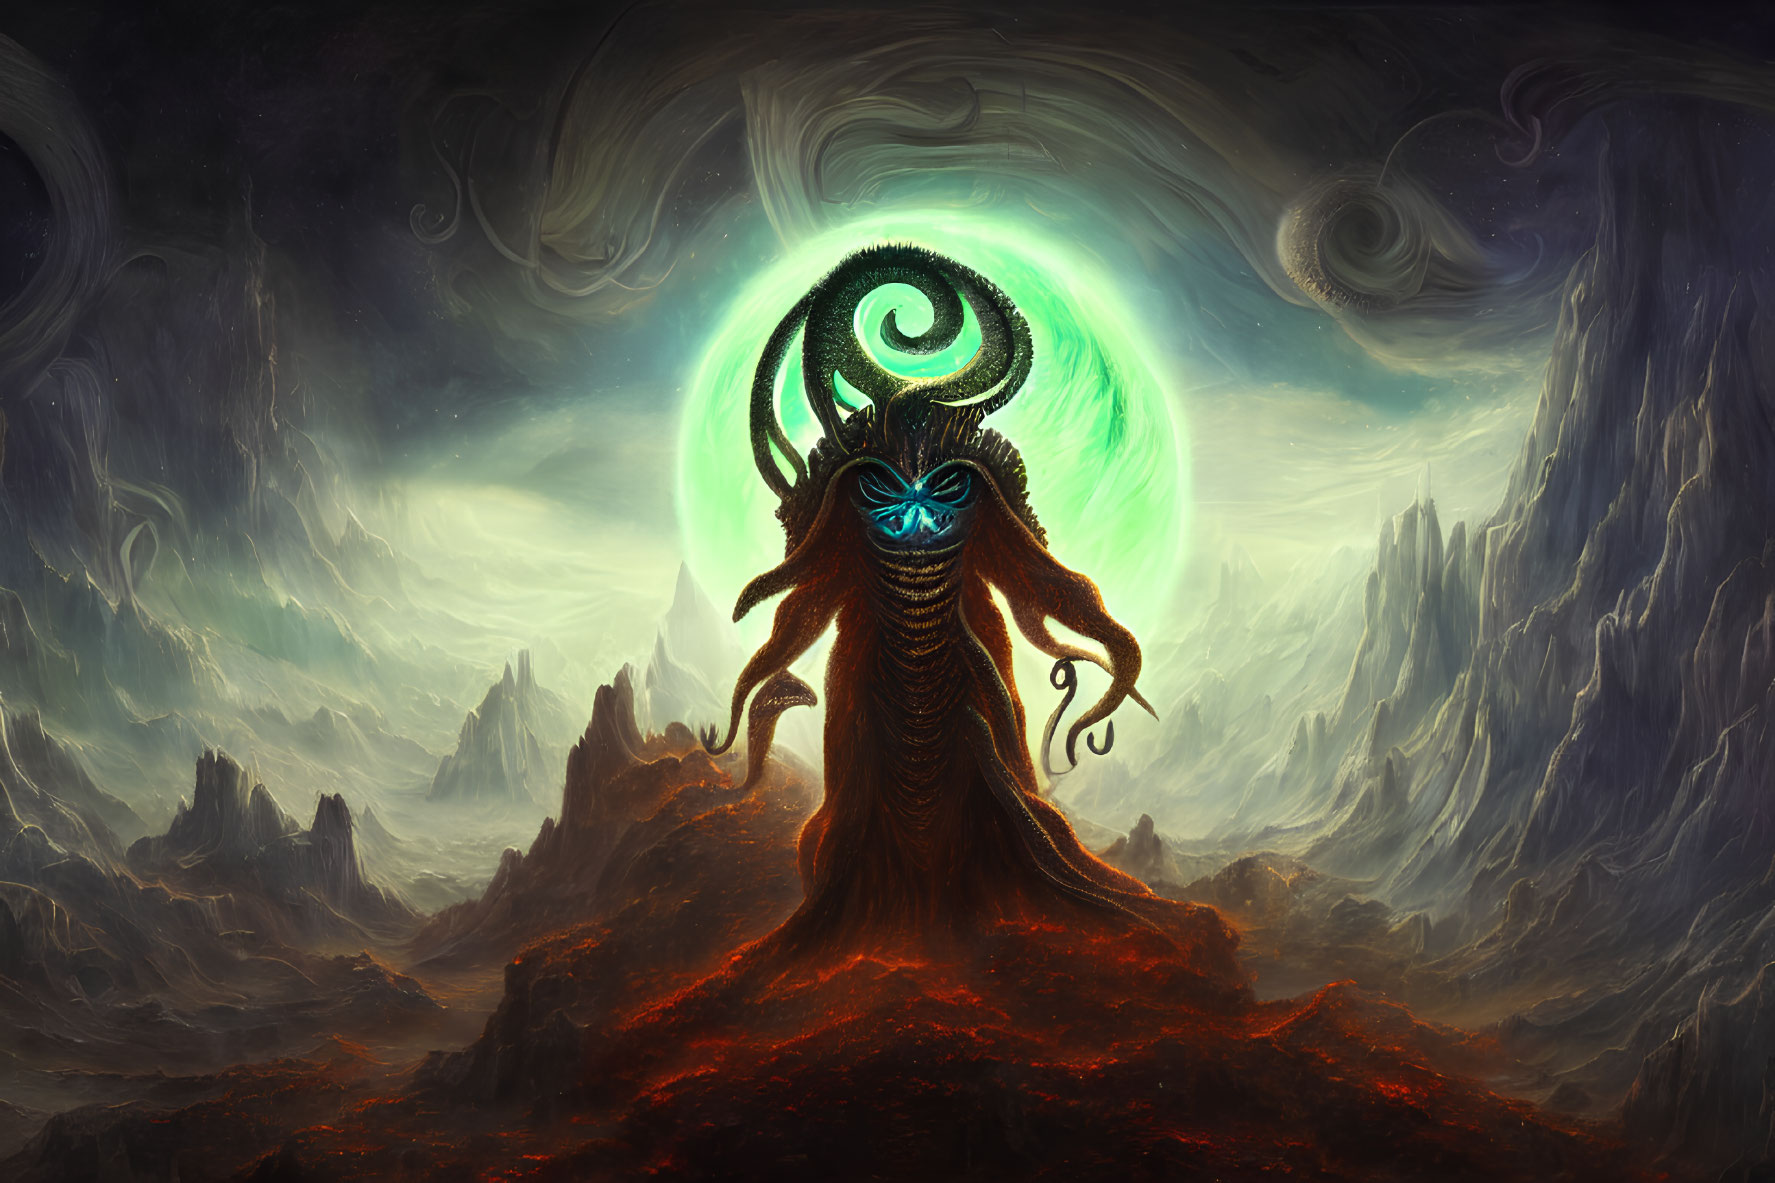 Mysterious tentacled creature with glowing symbols in dark landscape